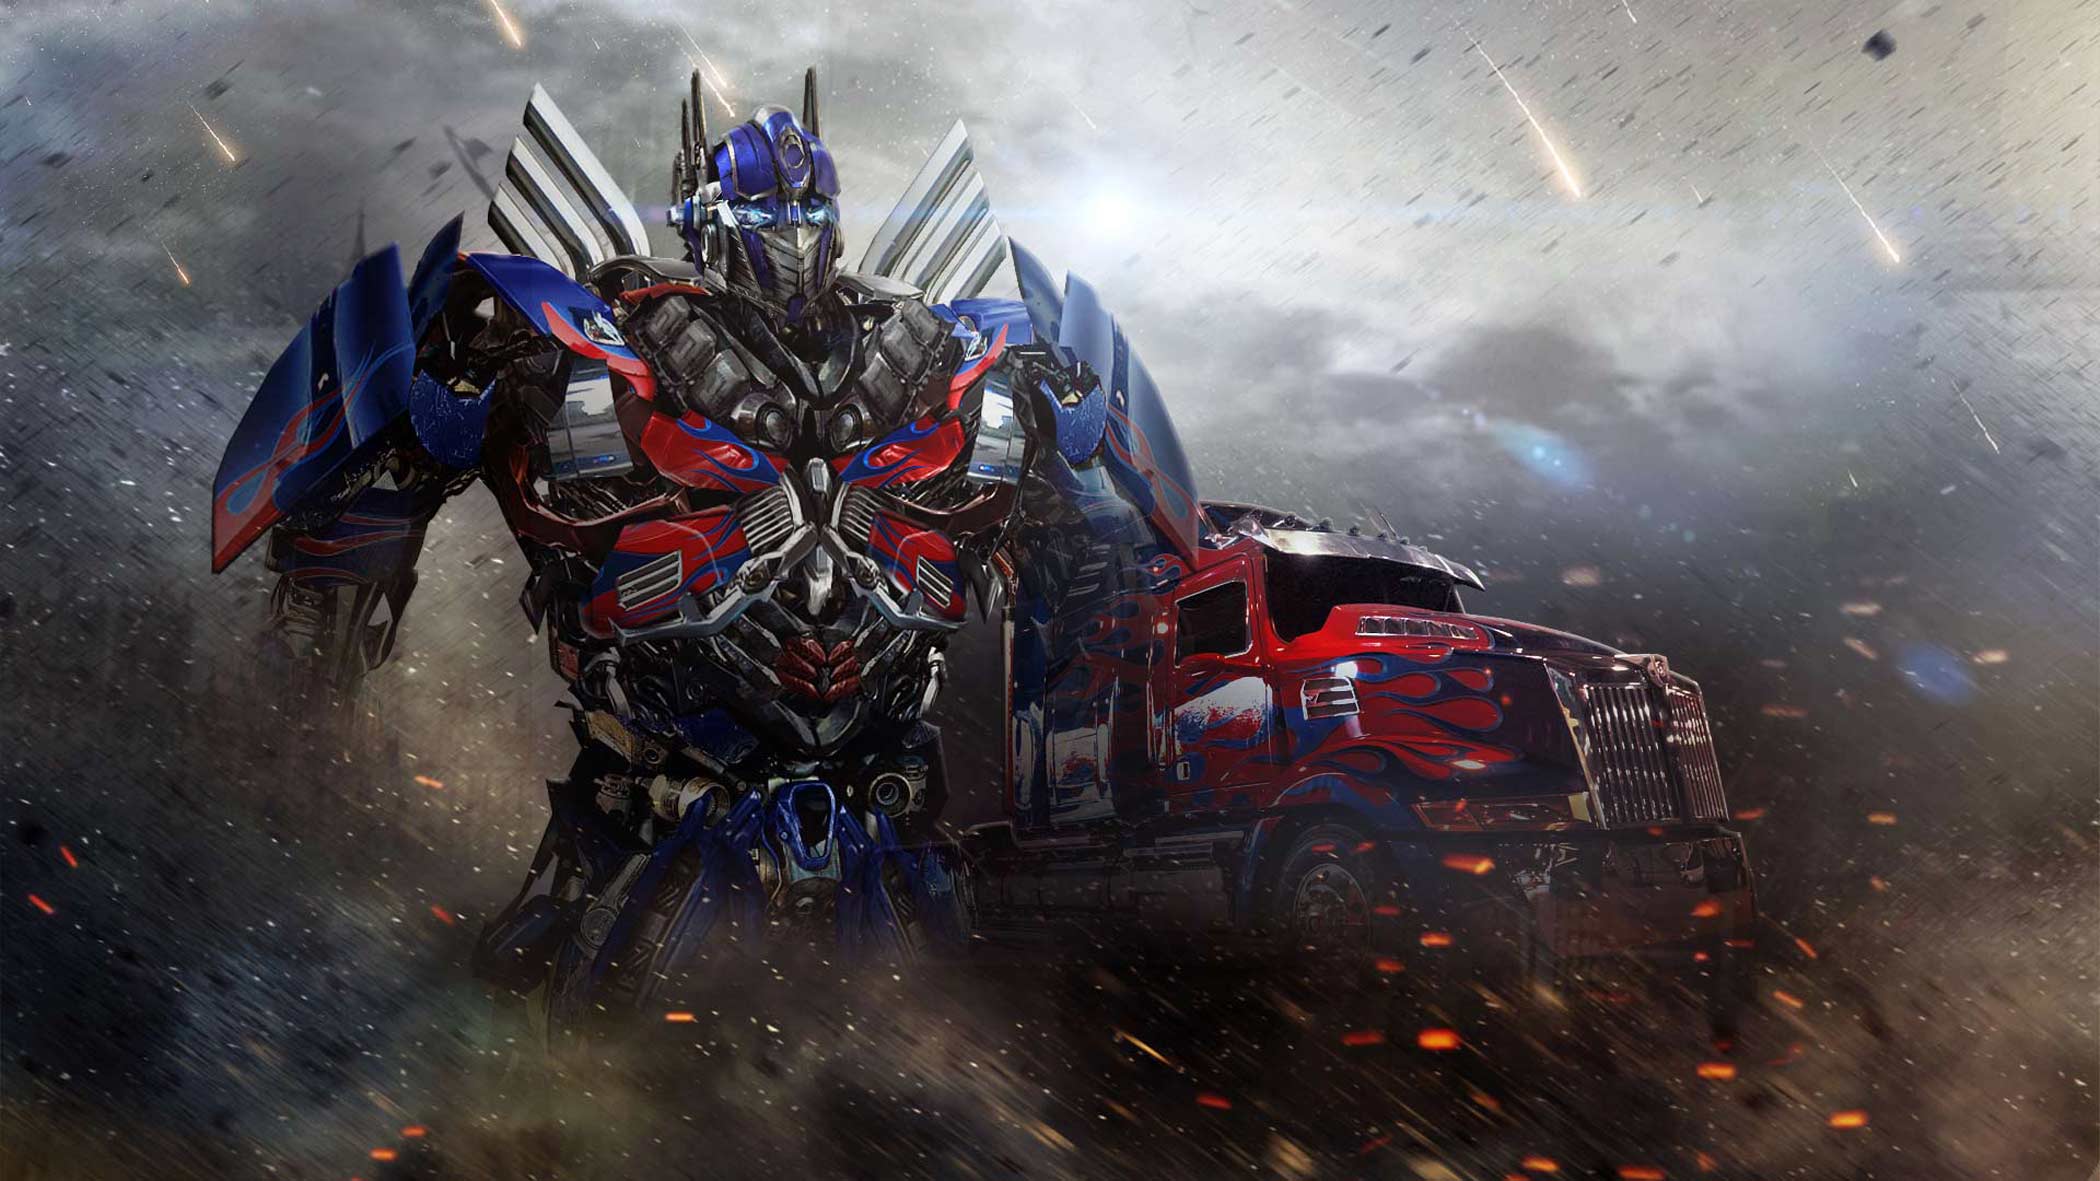 Transformers 4 Age of Extinction Wallpaper and Images | Cool ...